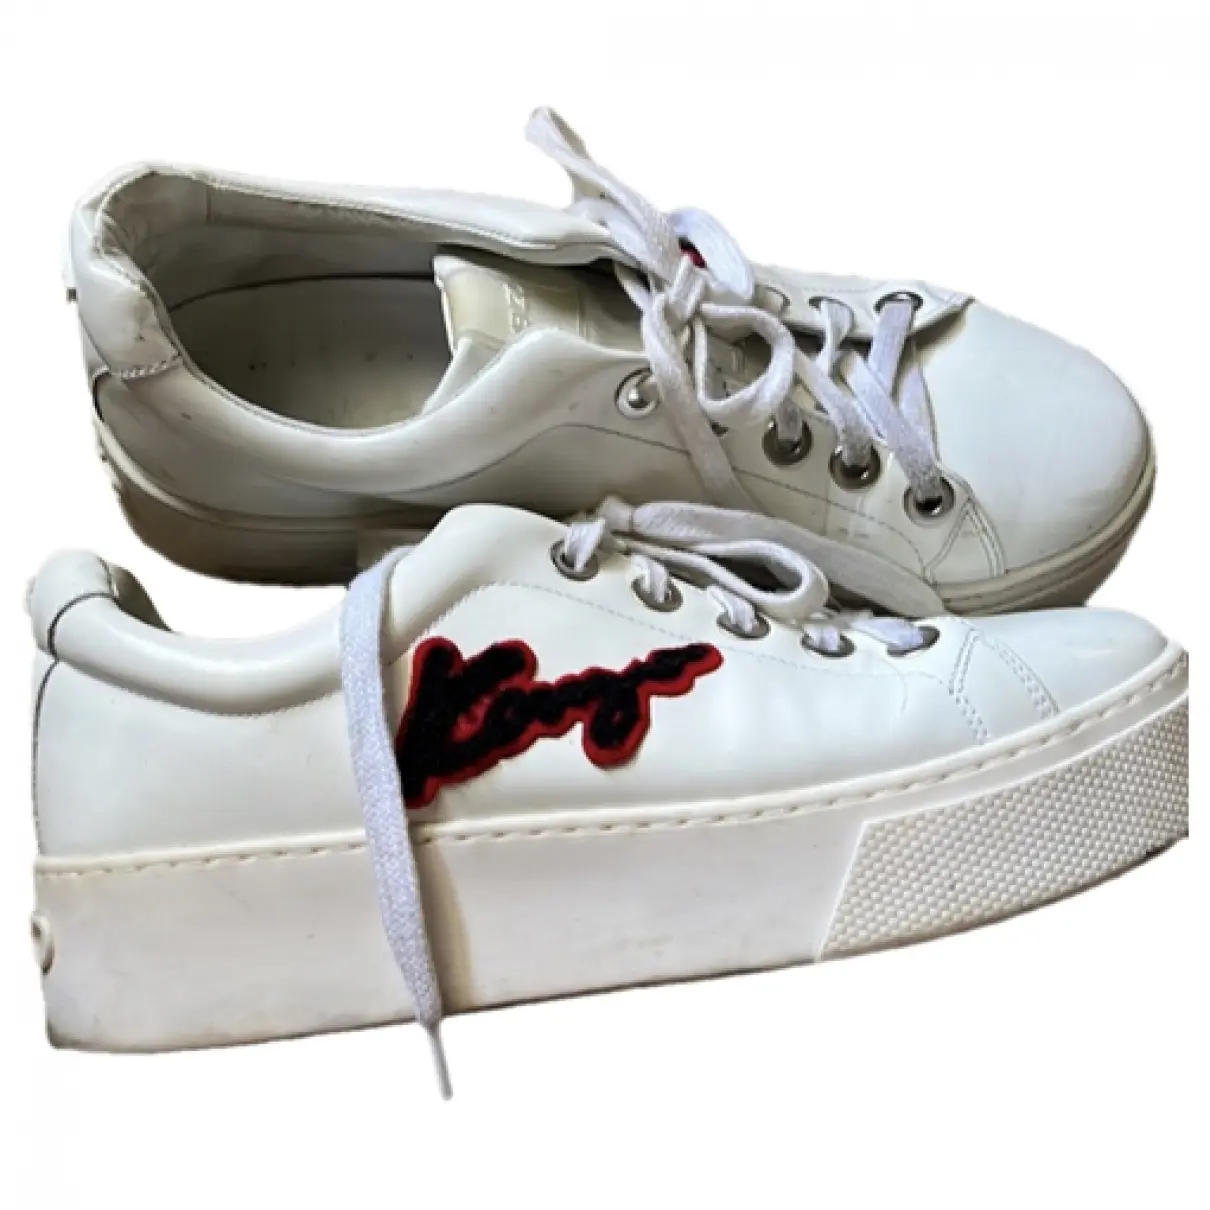 Patent leather trainers